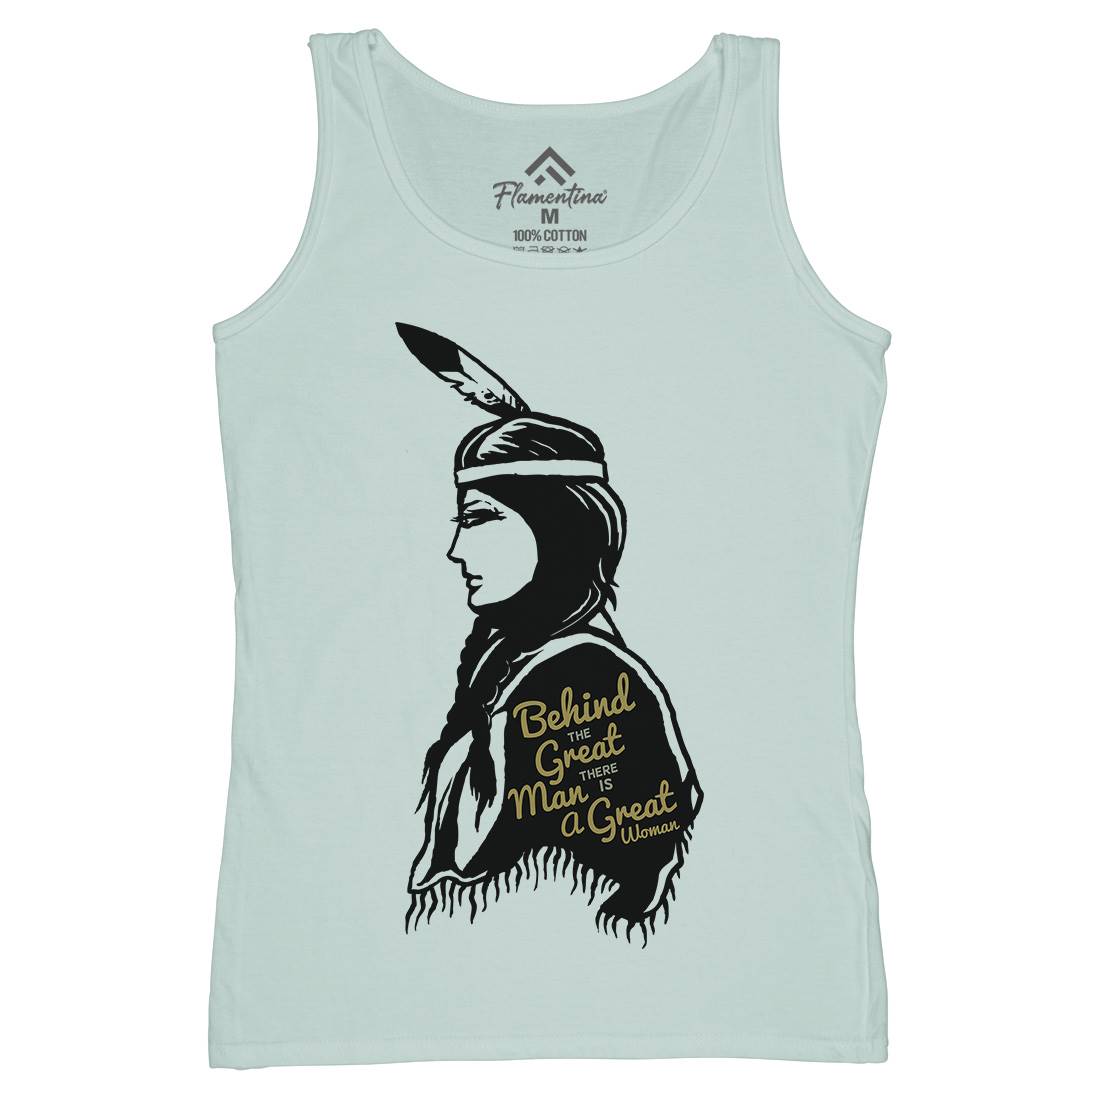 Great Woman Womens Organic Tank Top Vest Quotes A324